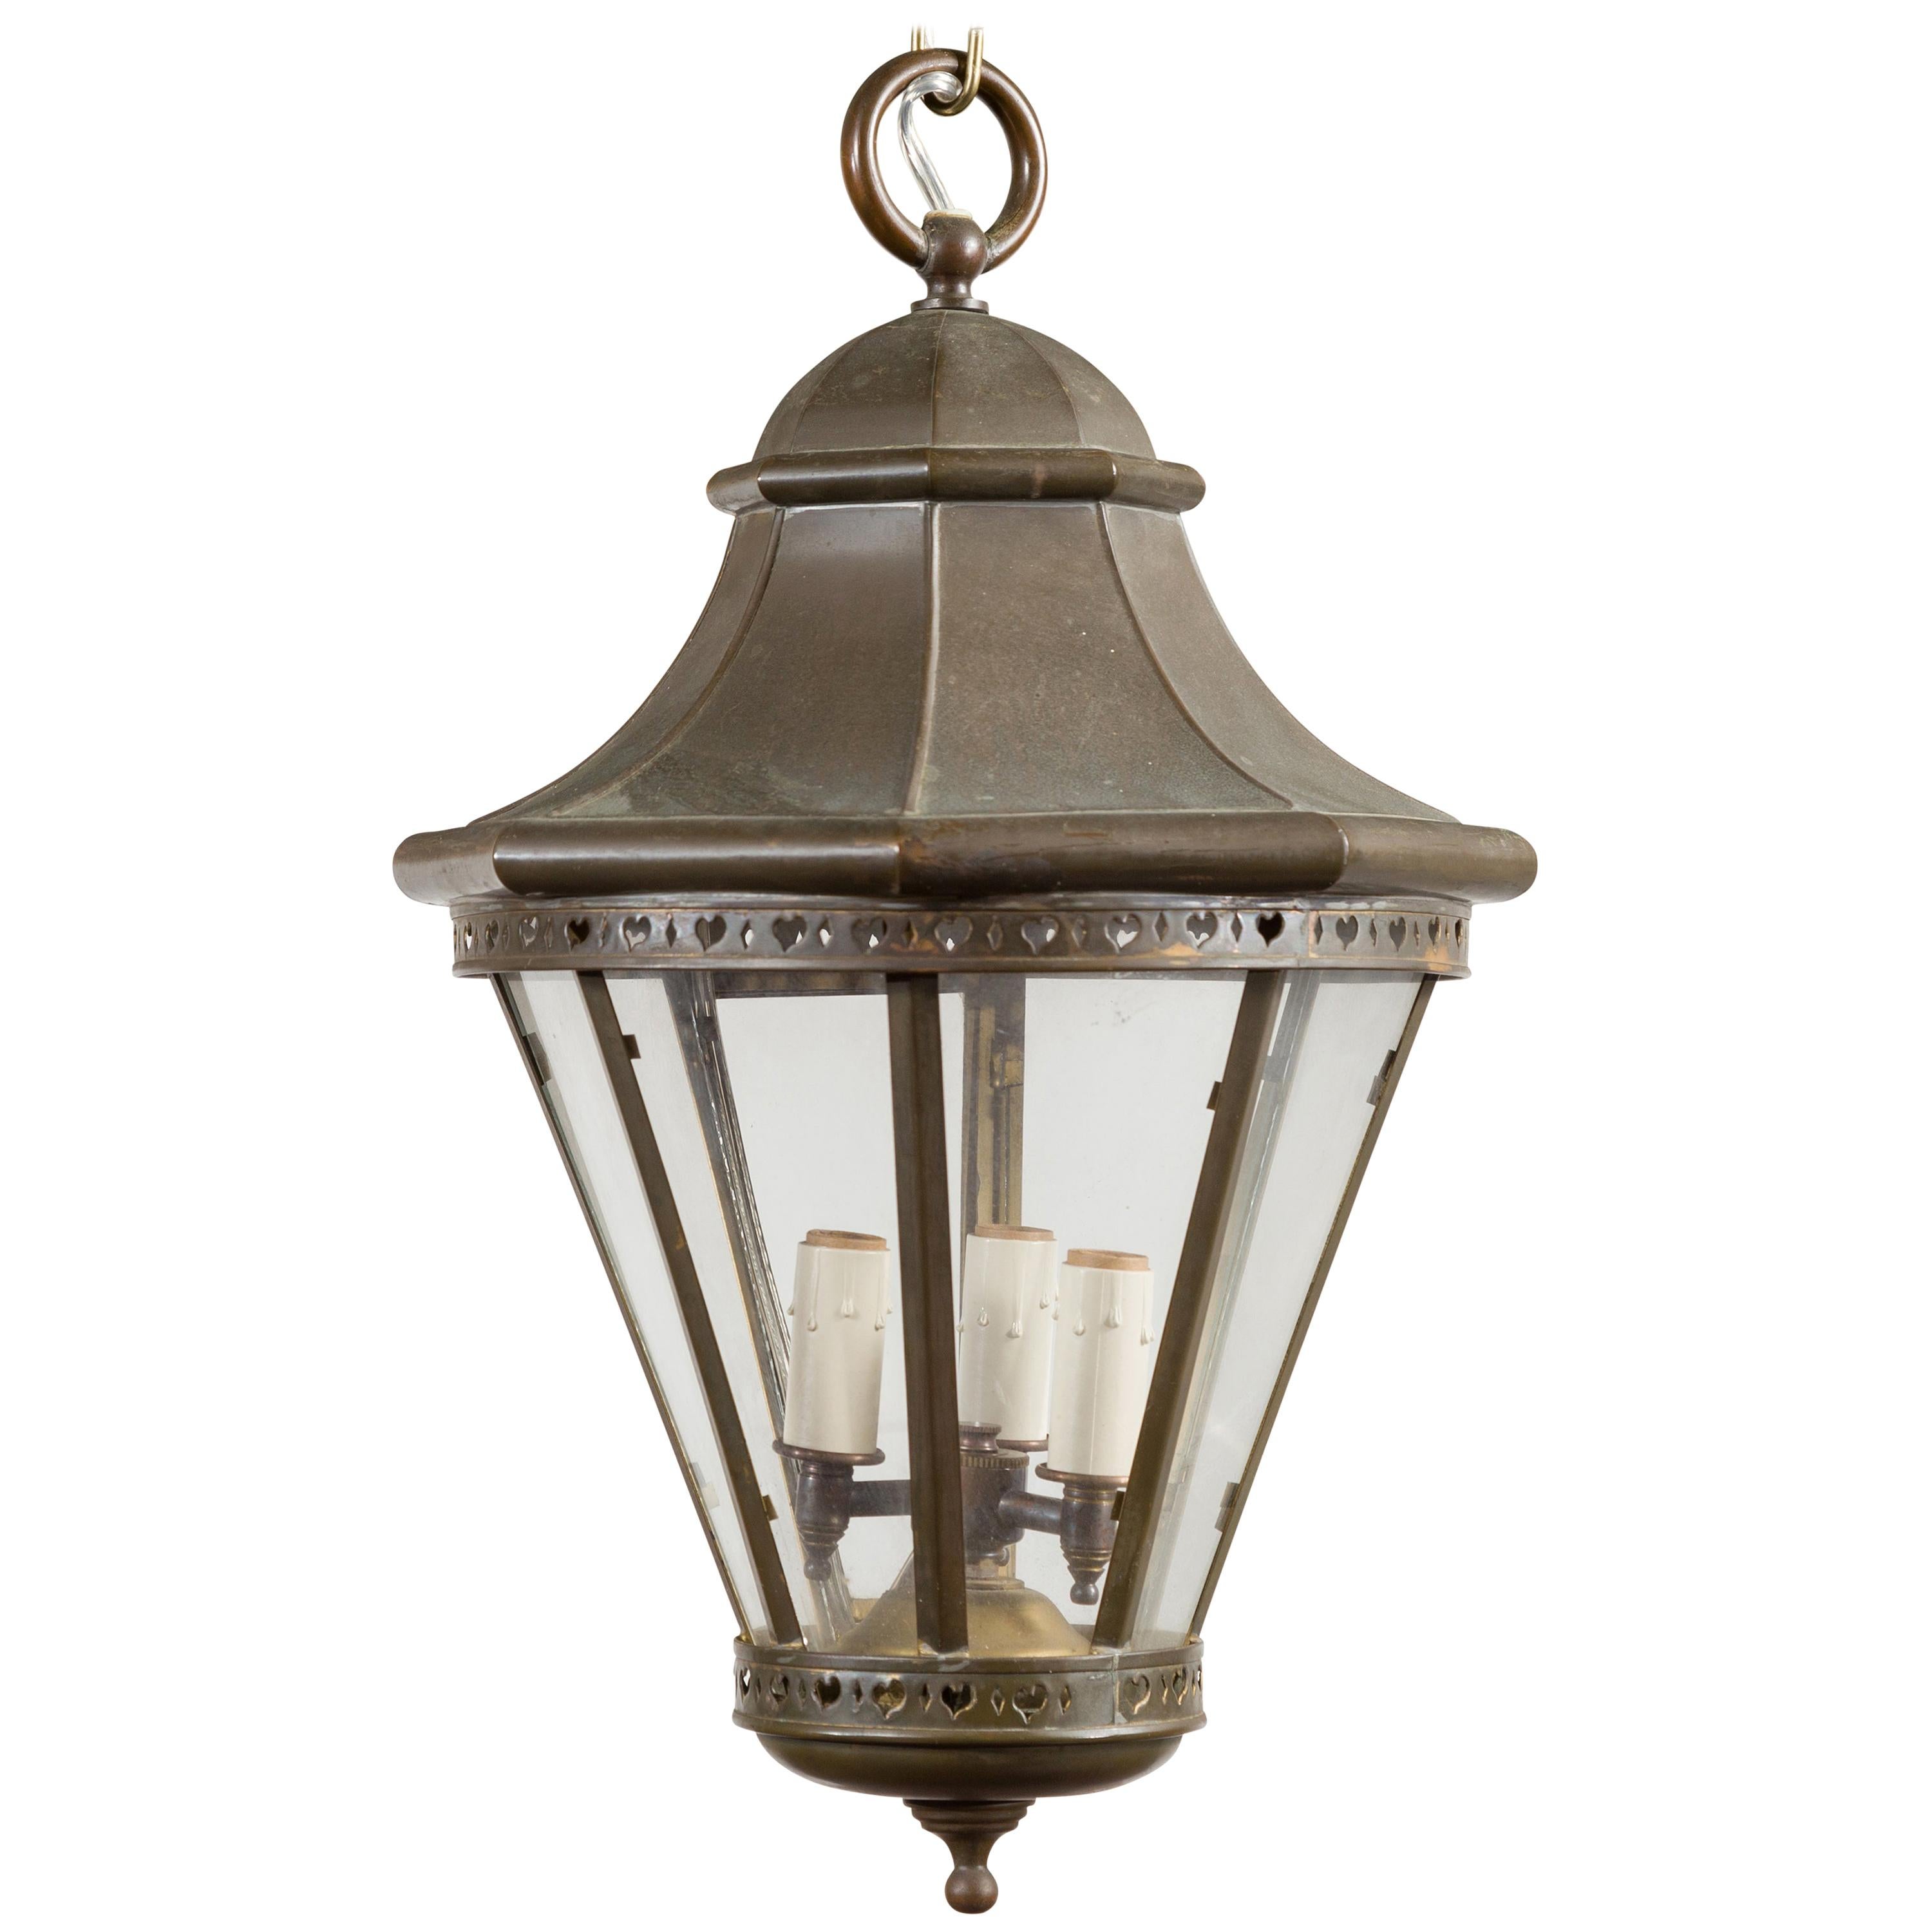 Petite English Turn of the Century Copper and Glass Lantern with Three Lights